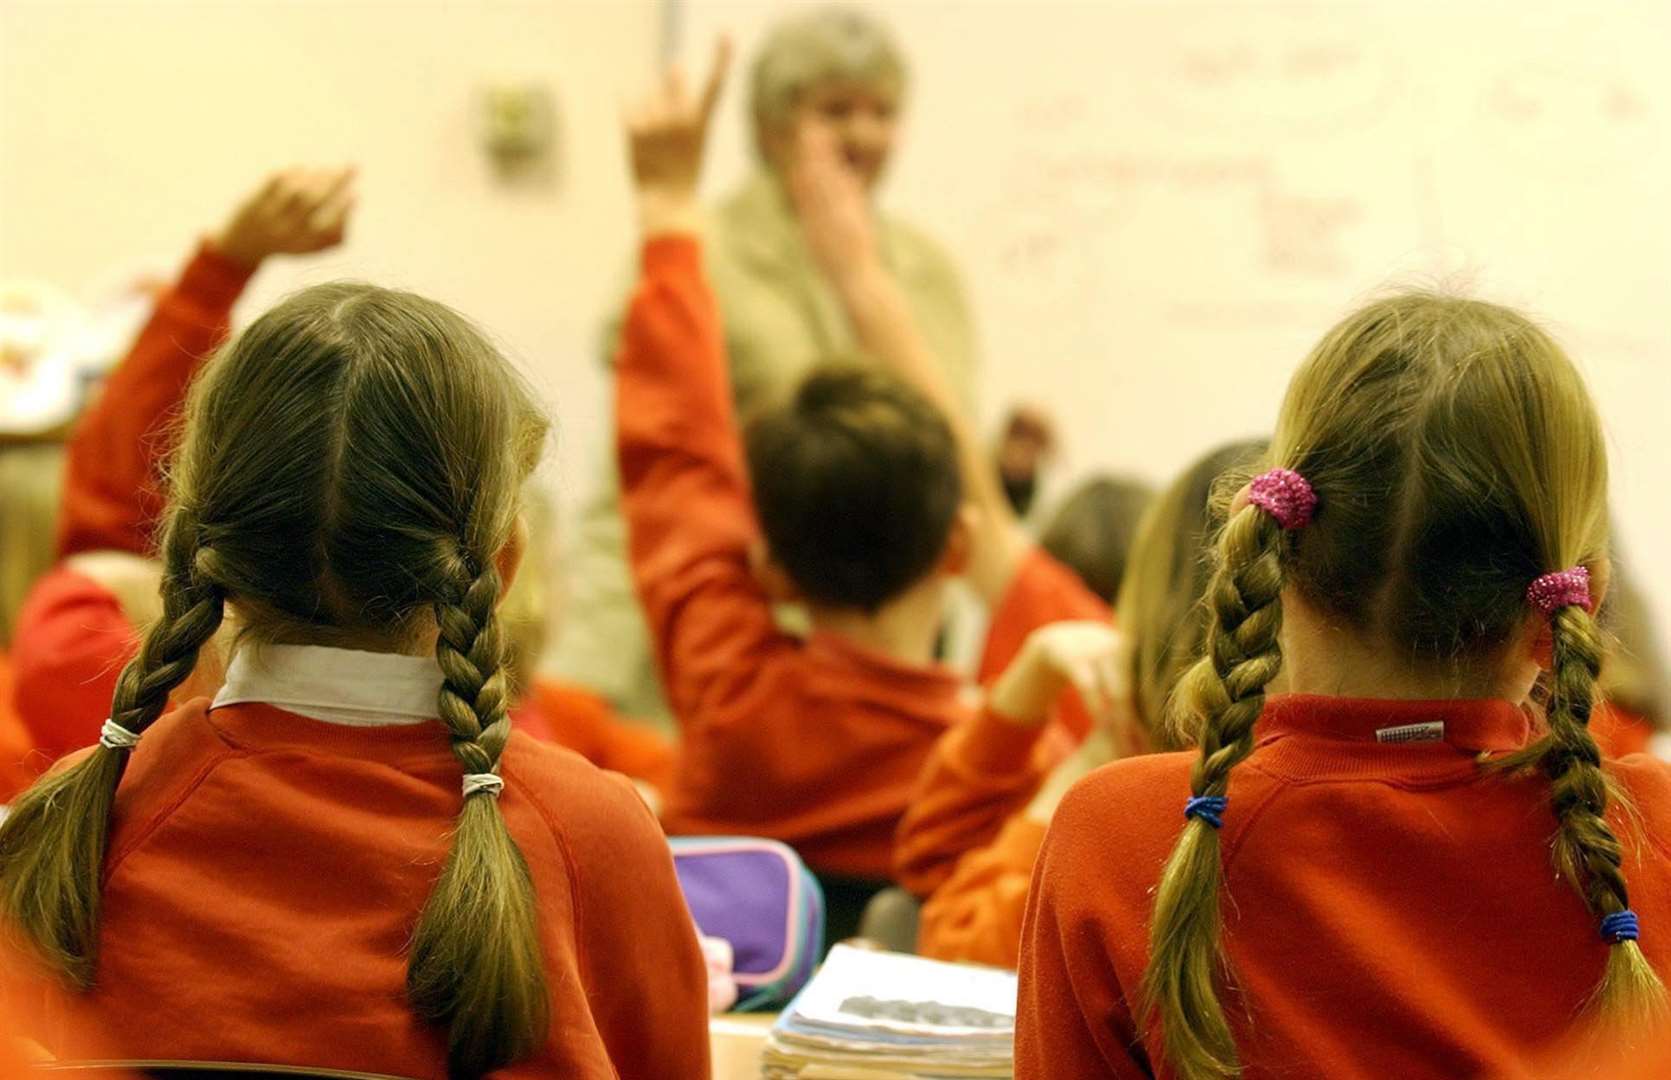 Upon return to school, one-to-one tutoring is set to be offered to disadvantaged children